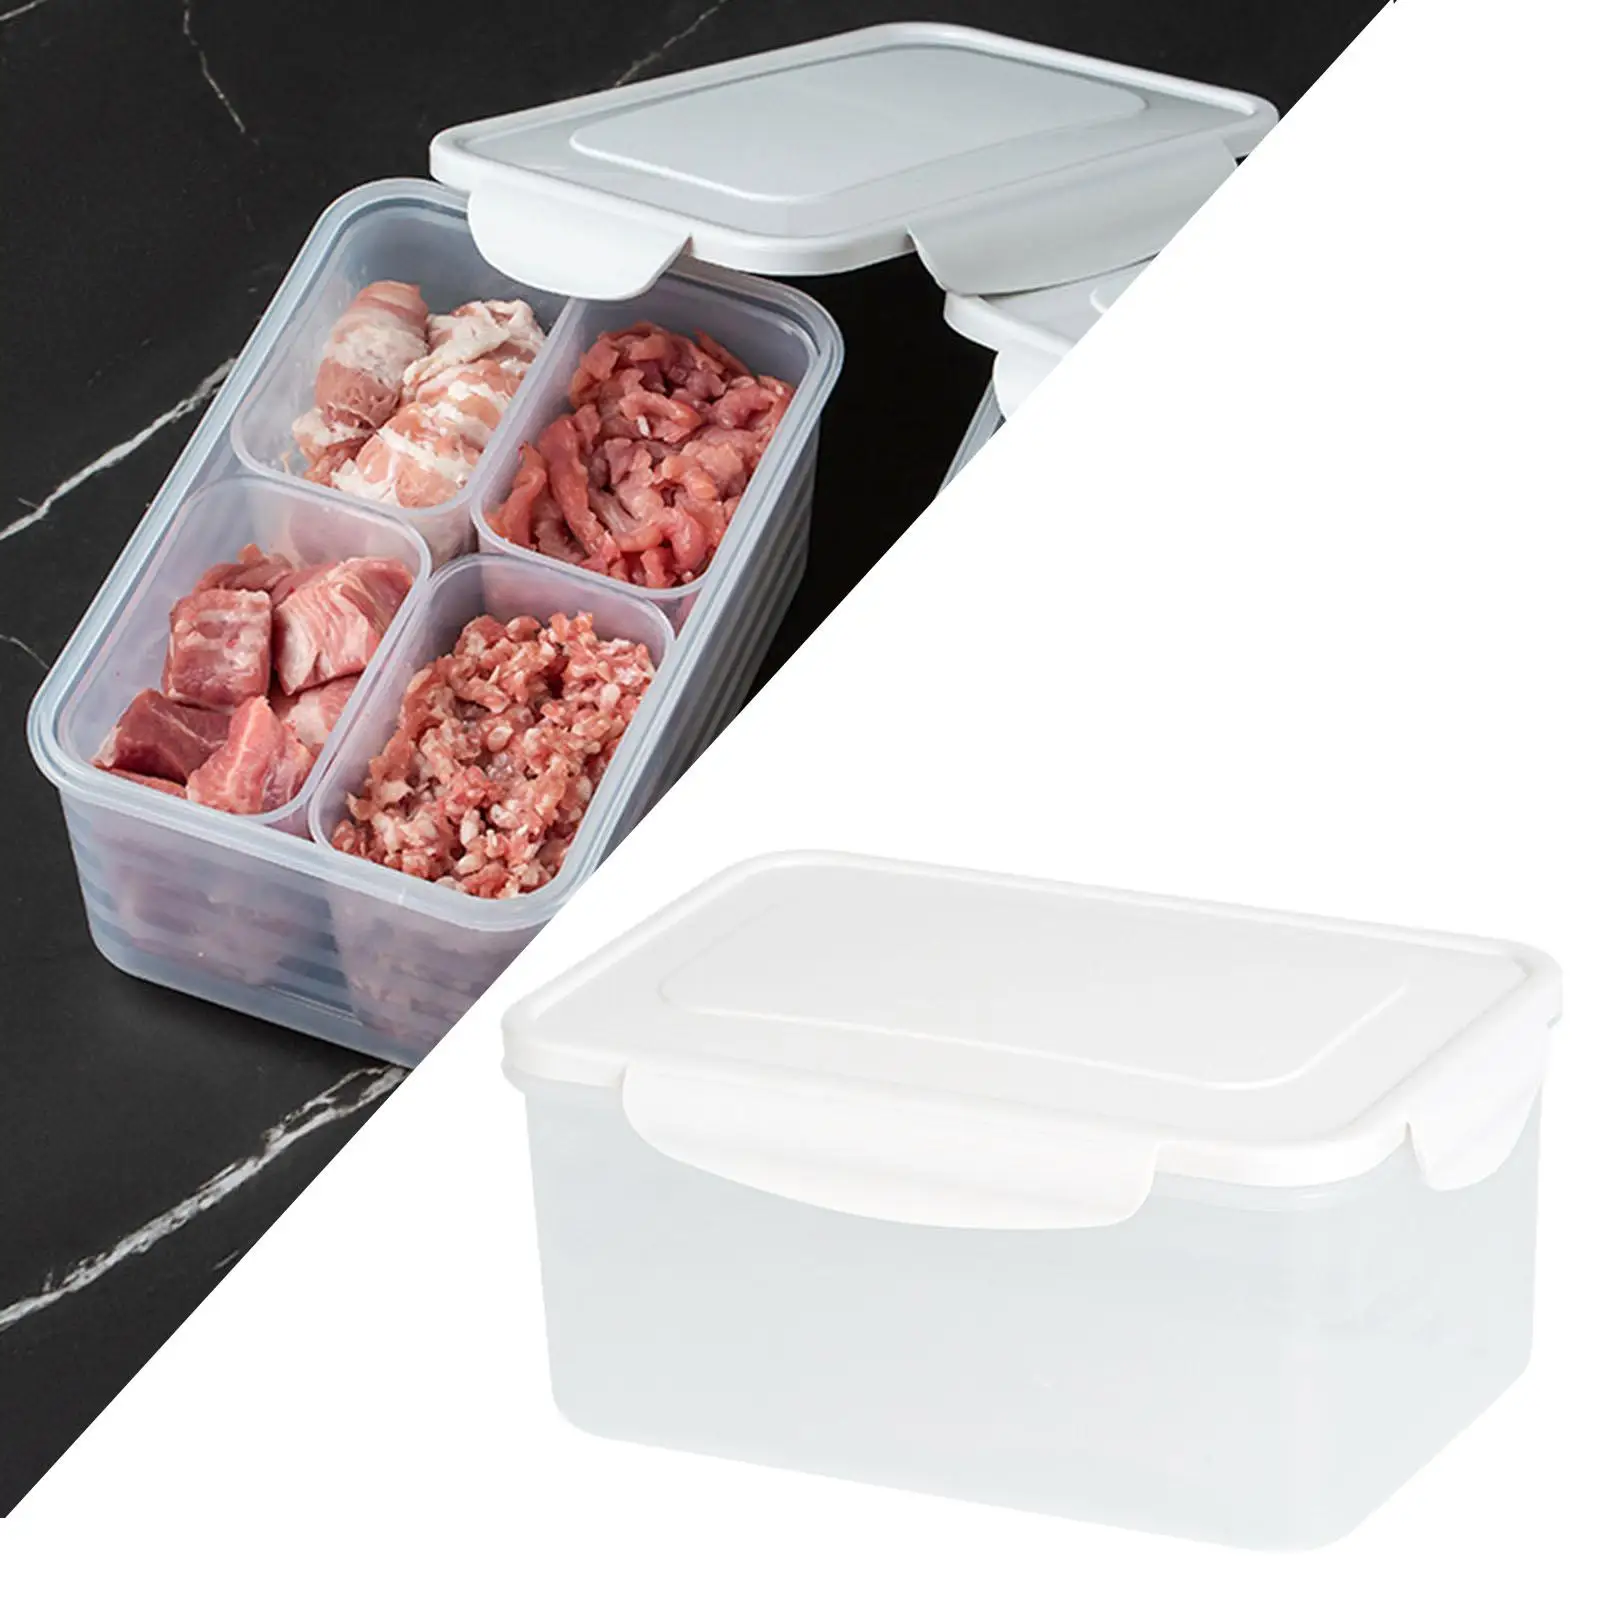 Household Food Storage Organizer Multipurpose with Lid Refrigerator Bins Leakproof for Drawer Fridge Shelves Pantry Cabinets